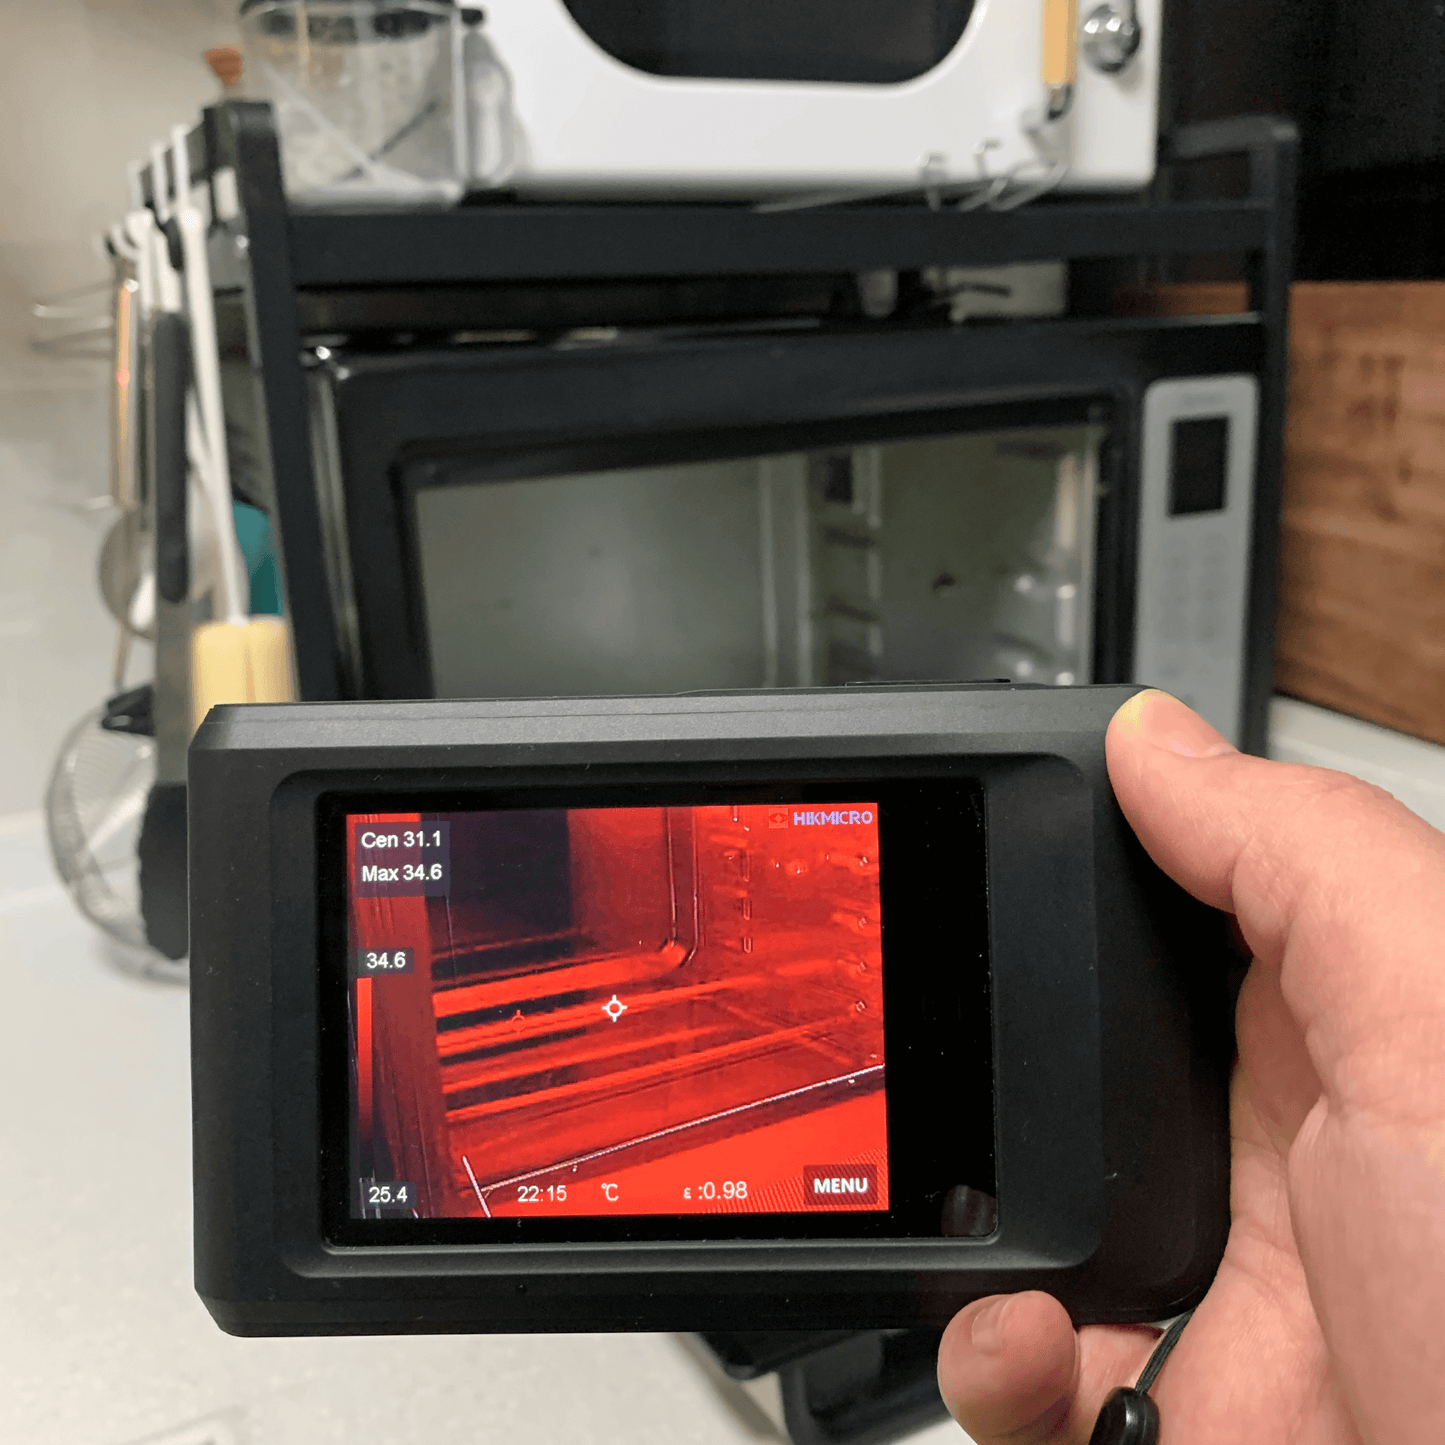 HikMicro Pocket2 Handheld Thermal Imager used to test oven appliance